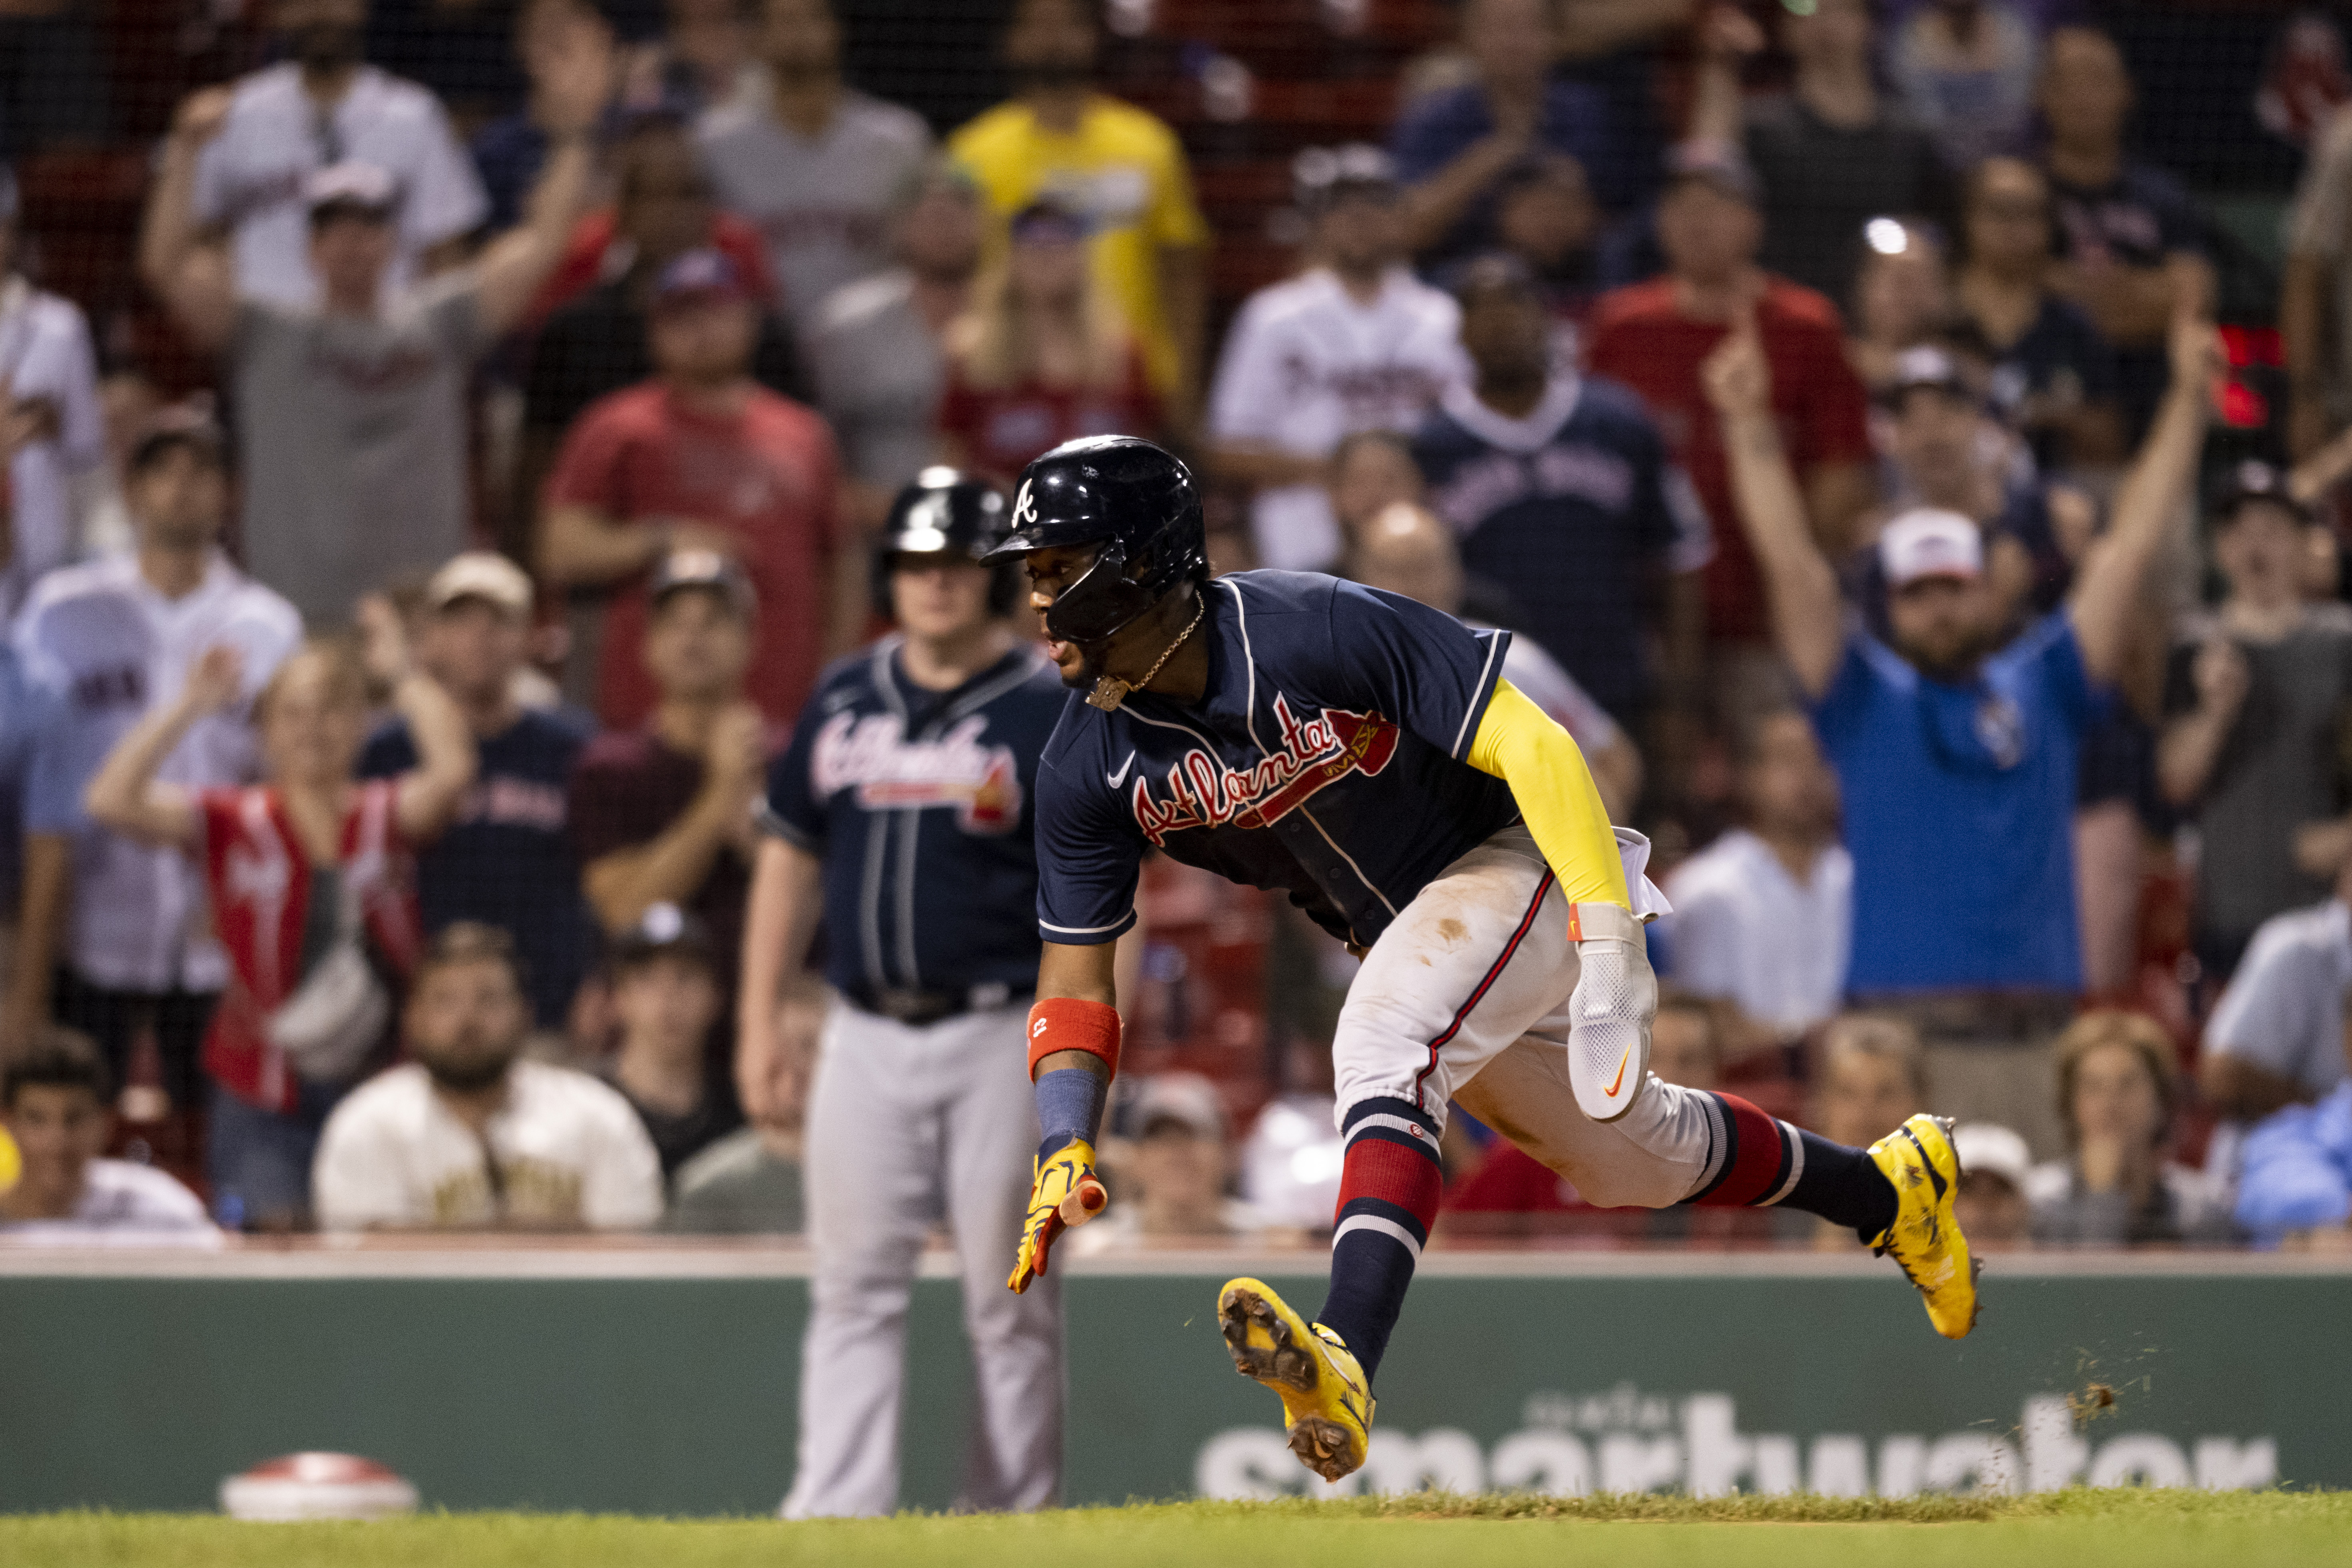 Ronald Acuna Jr. #13 of the Atlanta Braves slides as he scores during the eleventh inning of a game against the Boston Red Sox on August 9, 2022 at Fenway Park in Boston, Massachusetts.